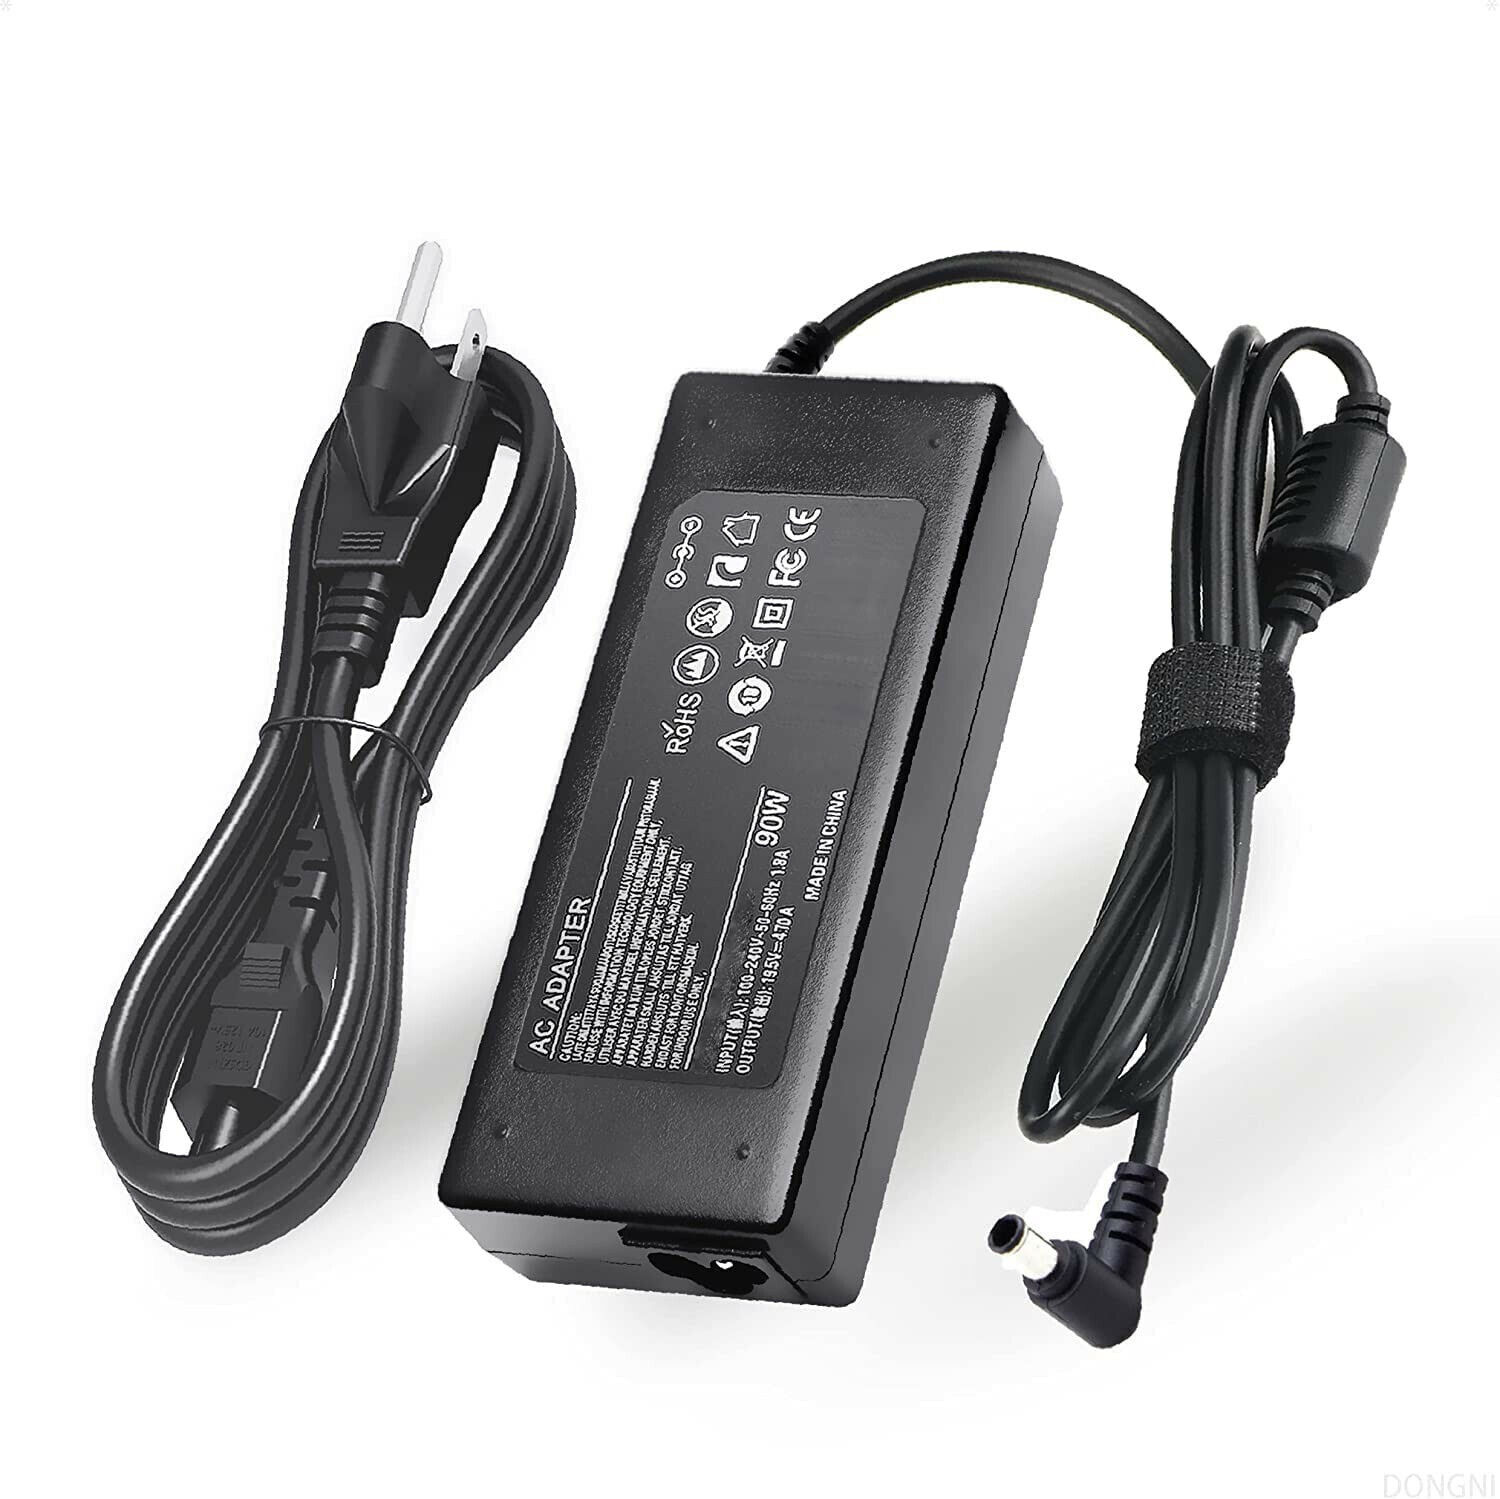 19.5V 4.7A 90W AC Power Adapter Charger for Sony Vaio Series PCG-3J1L PCG-7Y2L